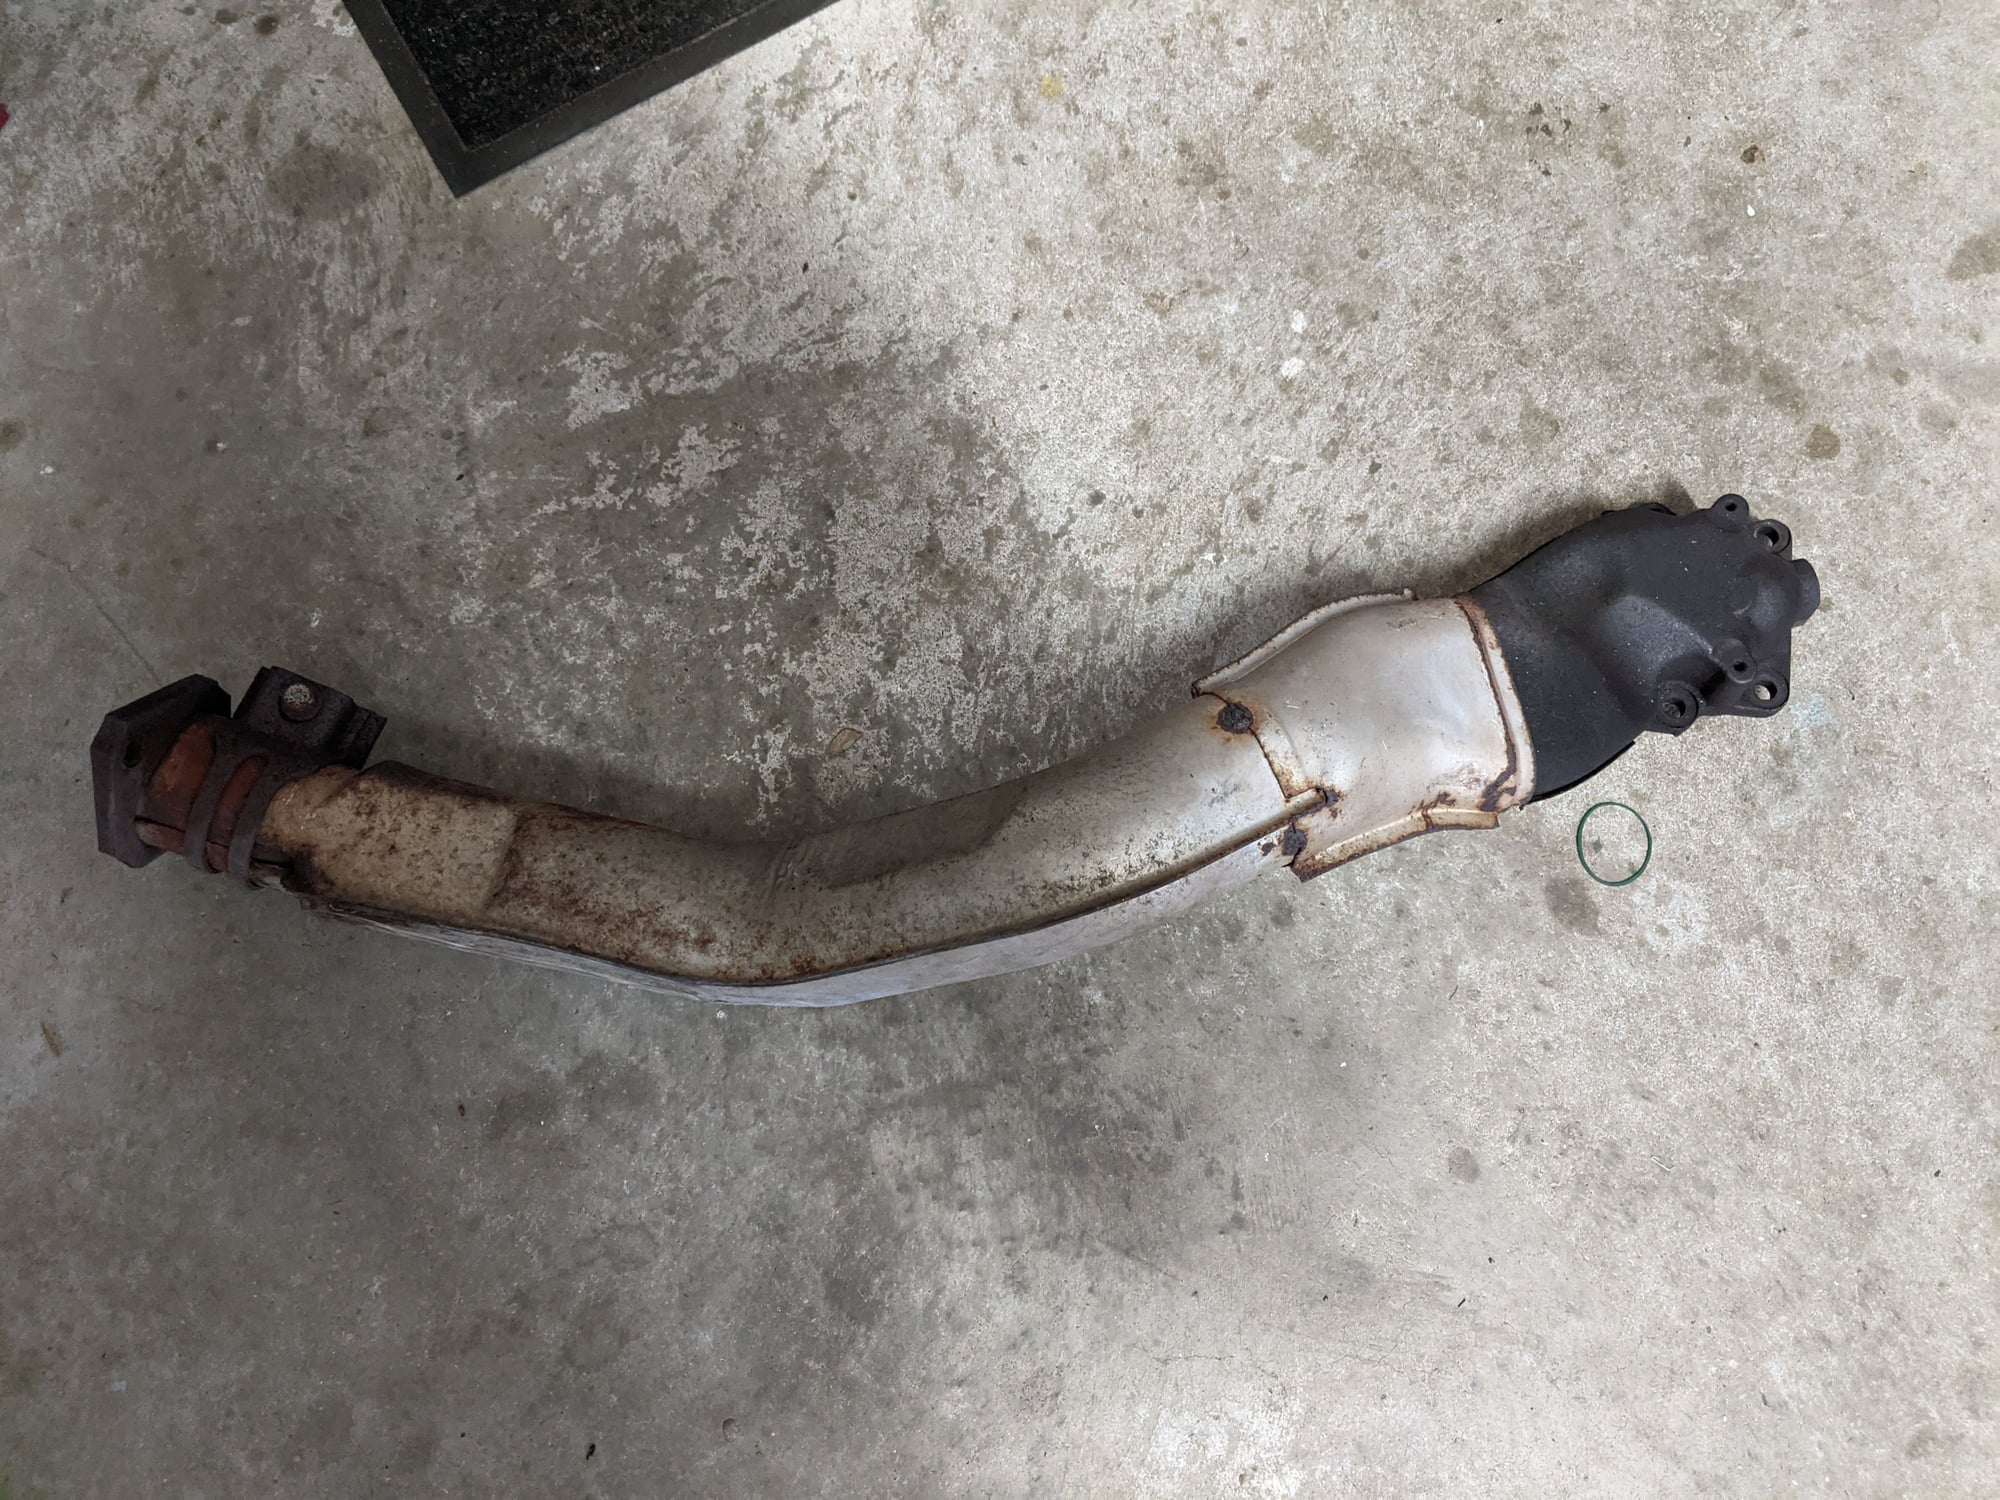 Engine - Exhaust - For Sale: JDM Down Pipe - Used - 1992 to 2002 Mazda RX-7 - Milton, FL 32583, United States